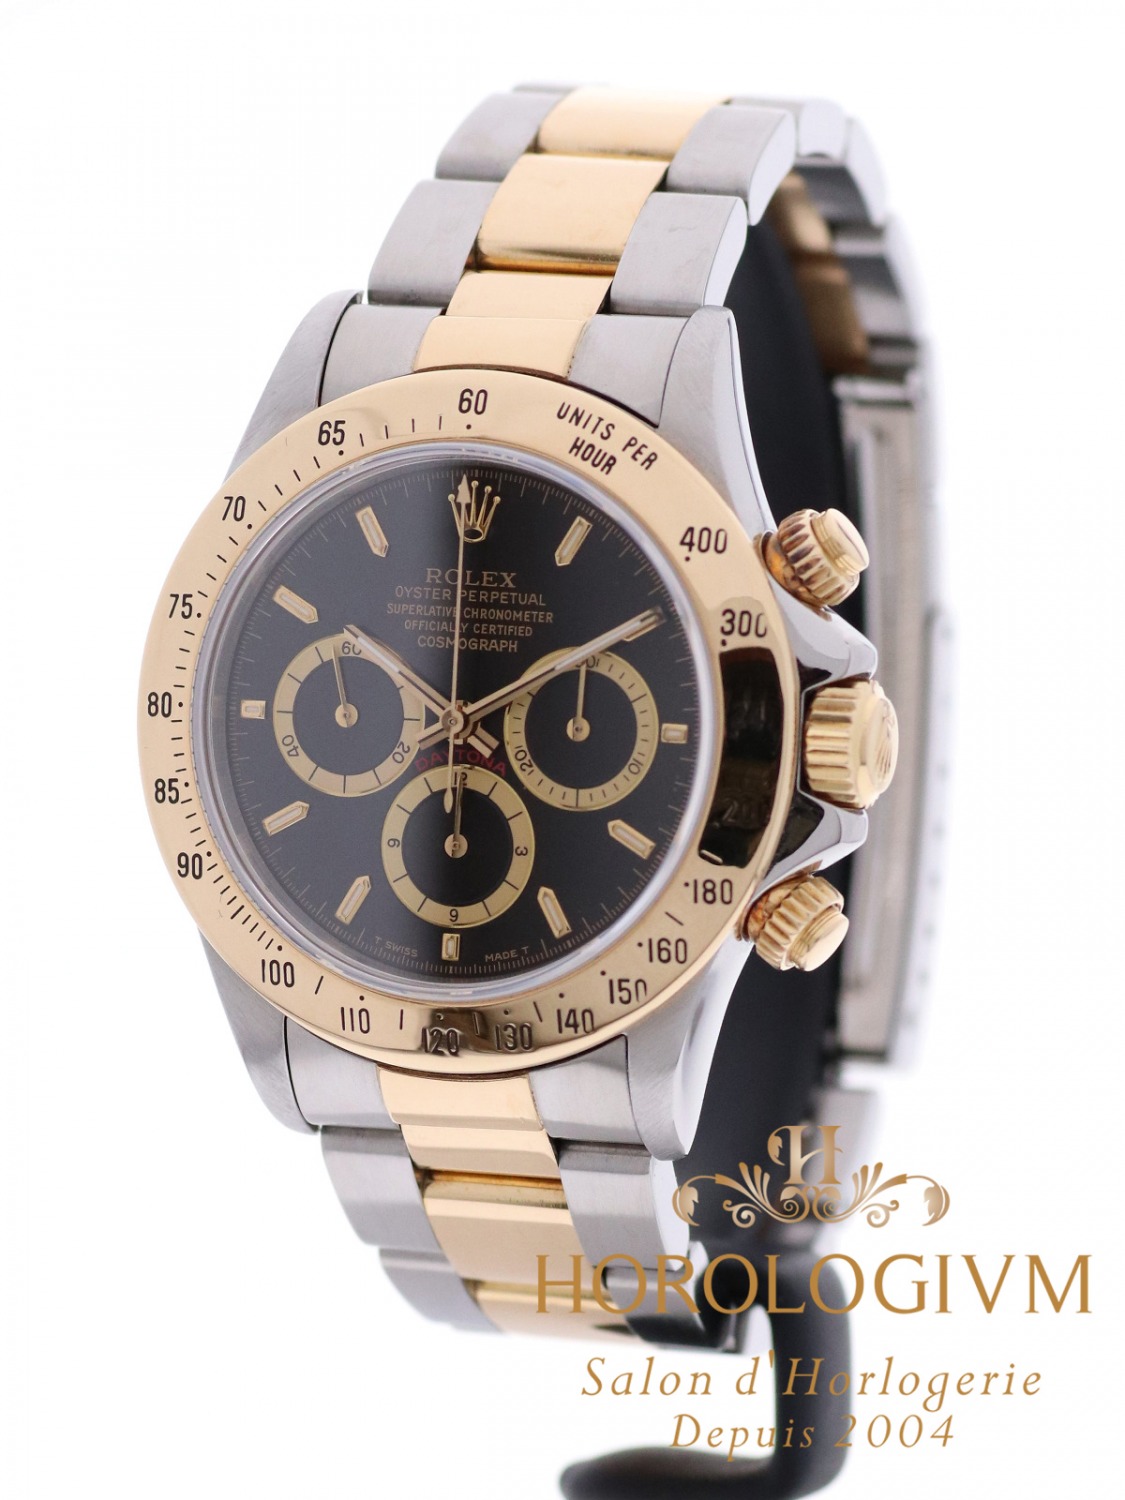 Rolex Daytona Cosmograph Two-Tone 16523 watch, two-tone (bi-colored) silver and yellow gold